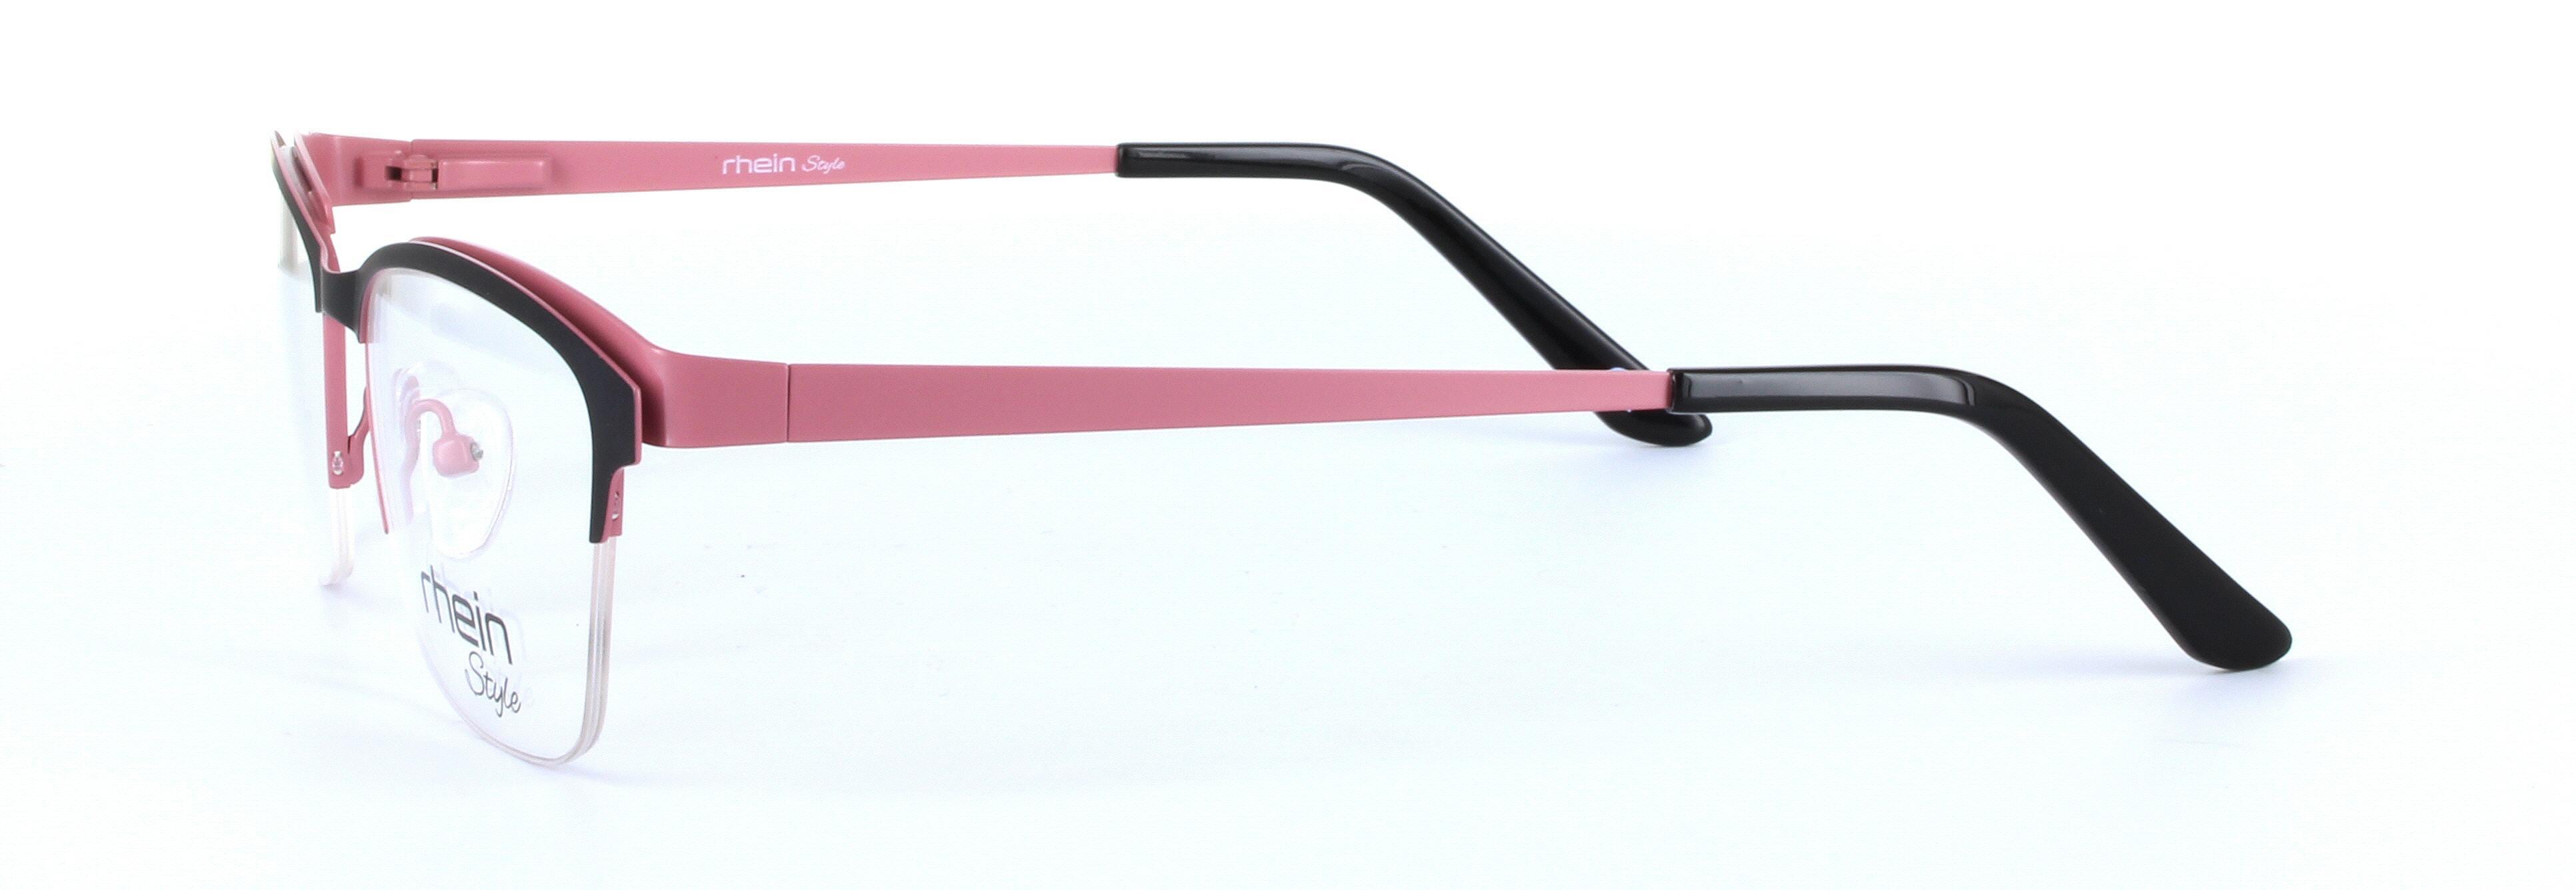 Andrea Black and Pink Semi Rimless Oval Metal Glasses - Image View 2